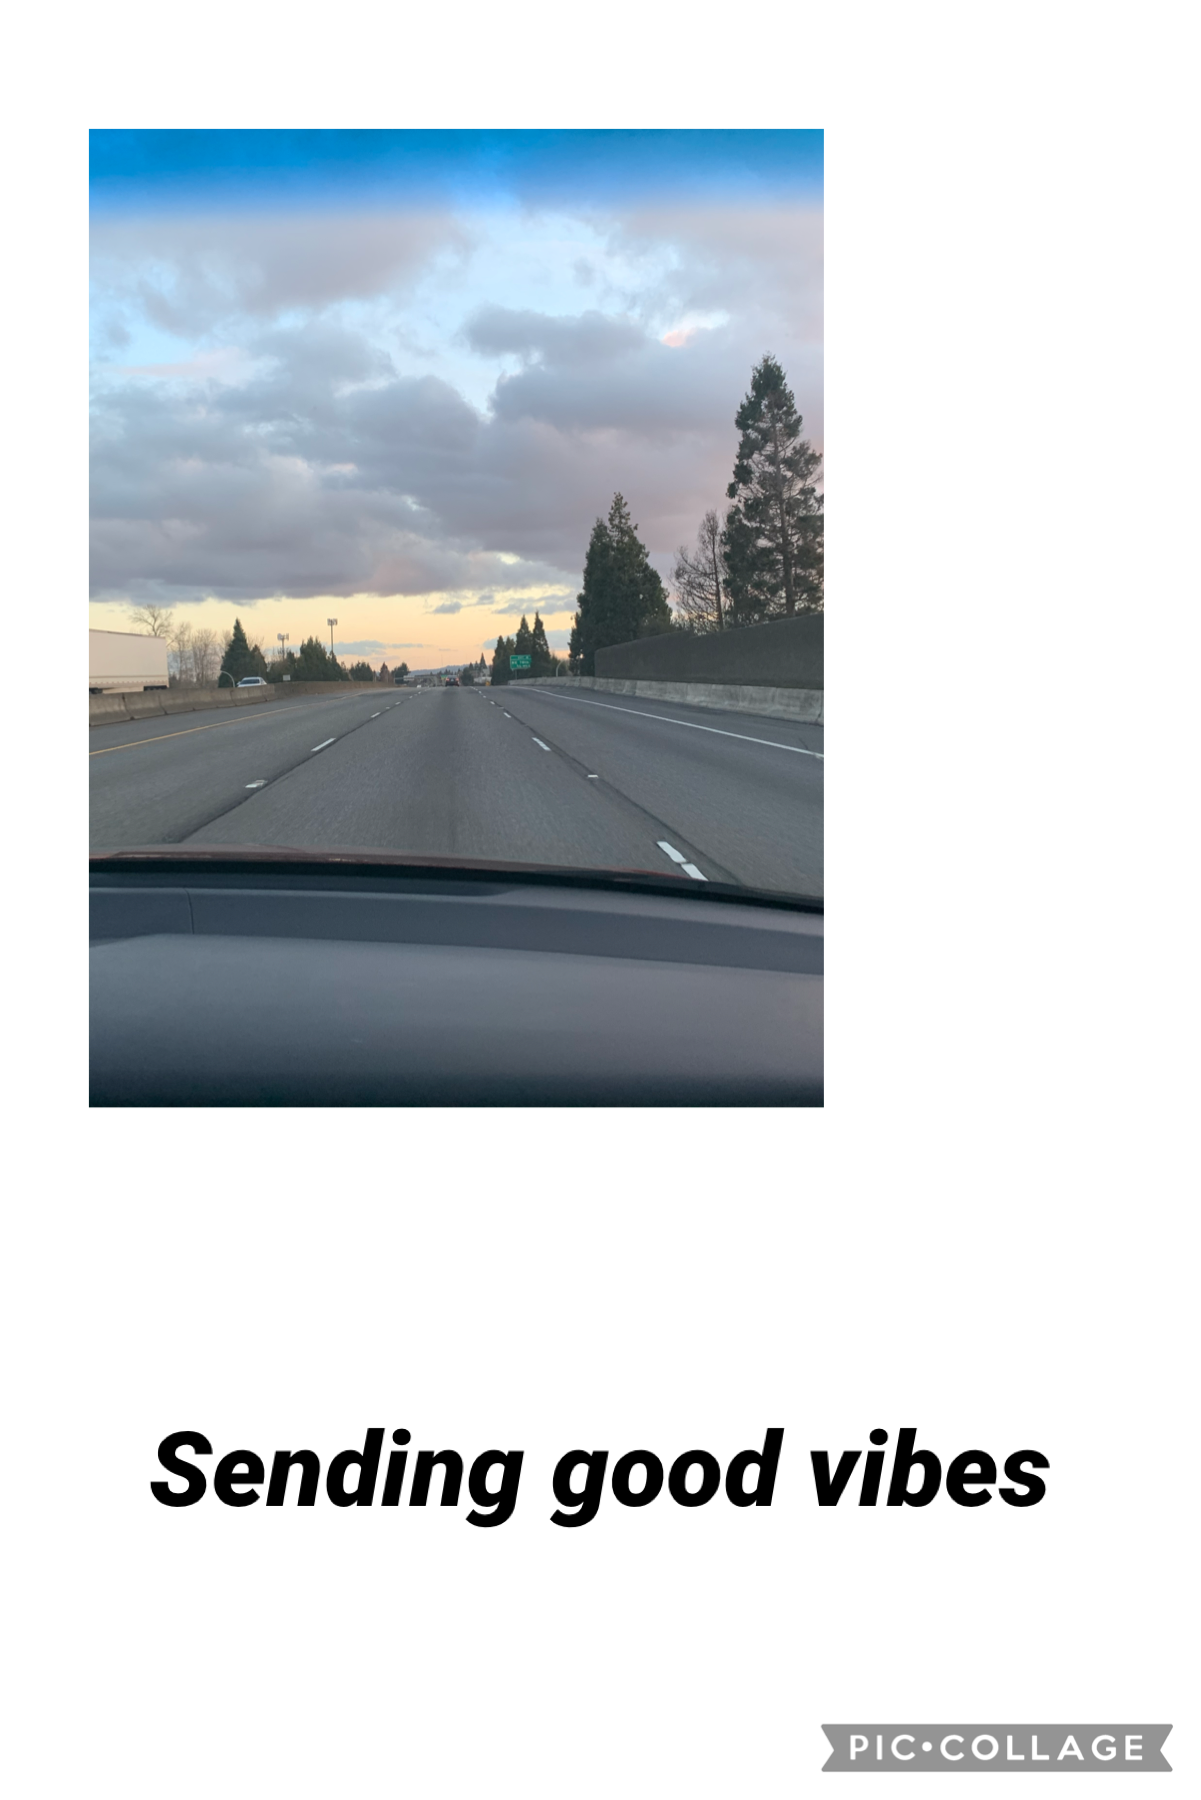 Hey guys so I really hope your doing and know I’m always sending positive vibesss 